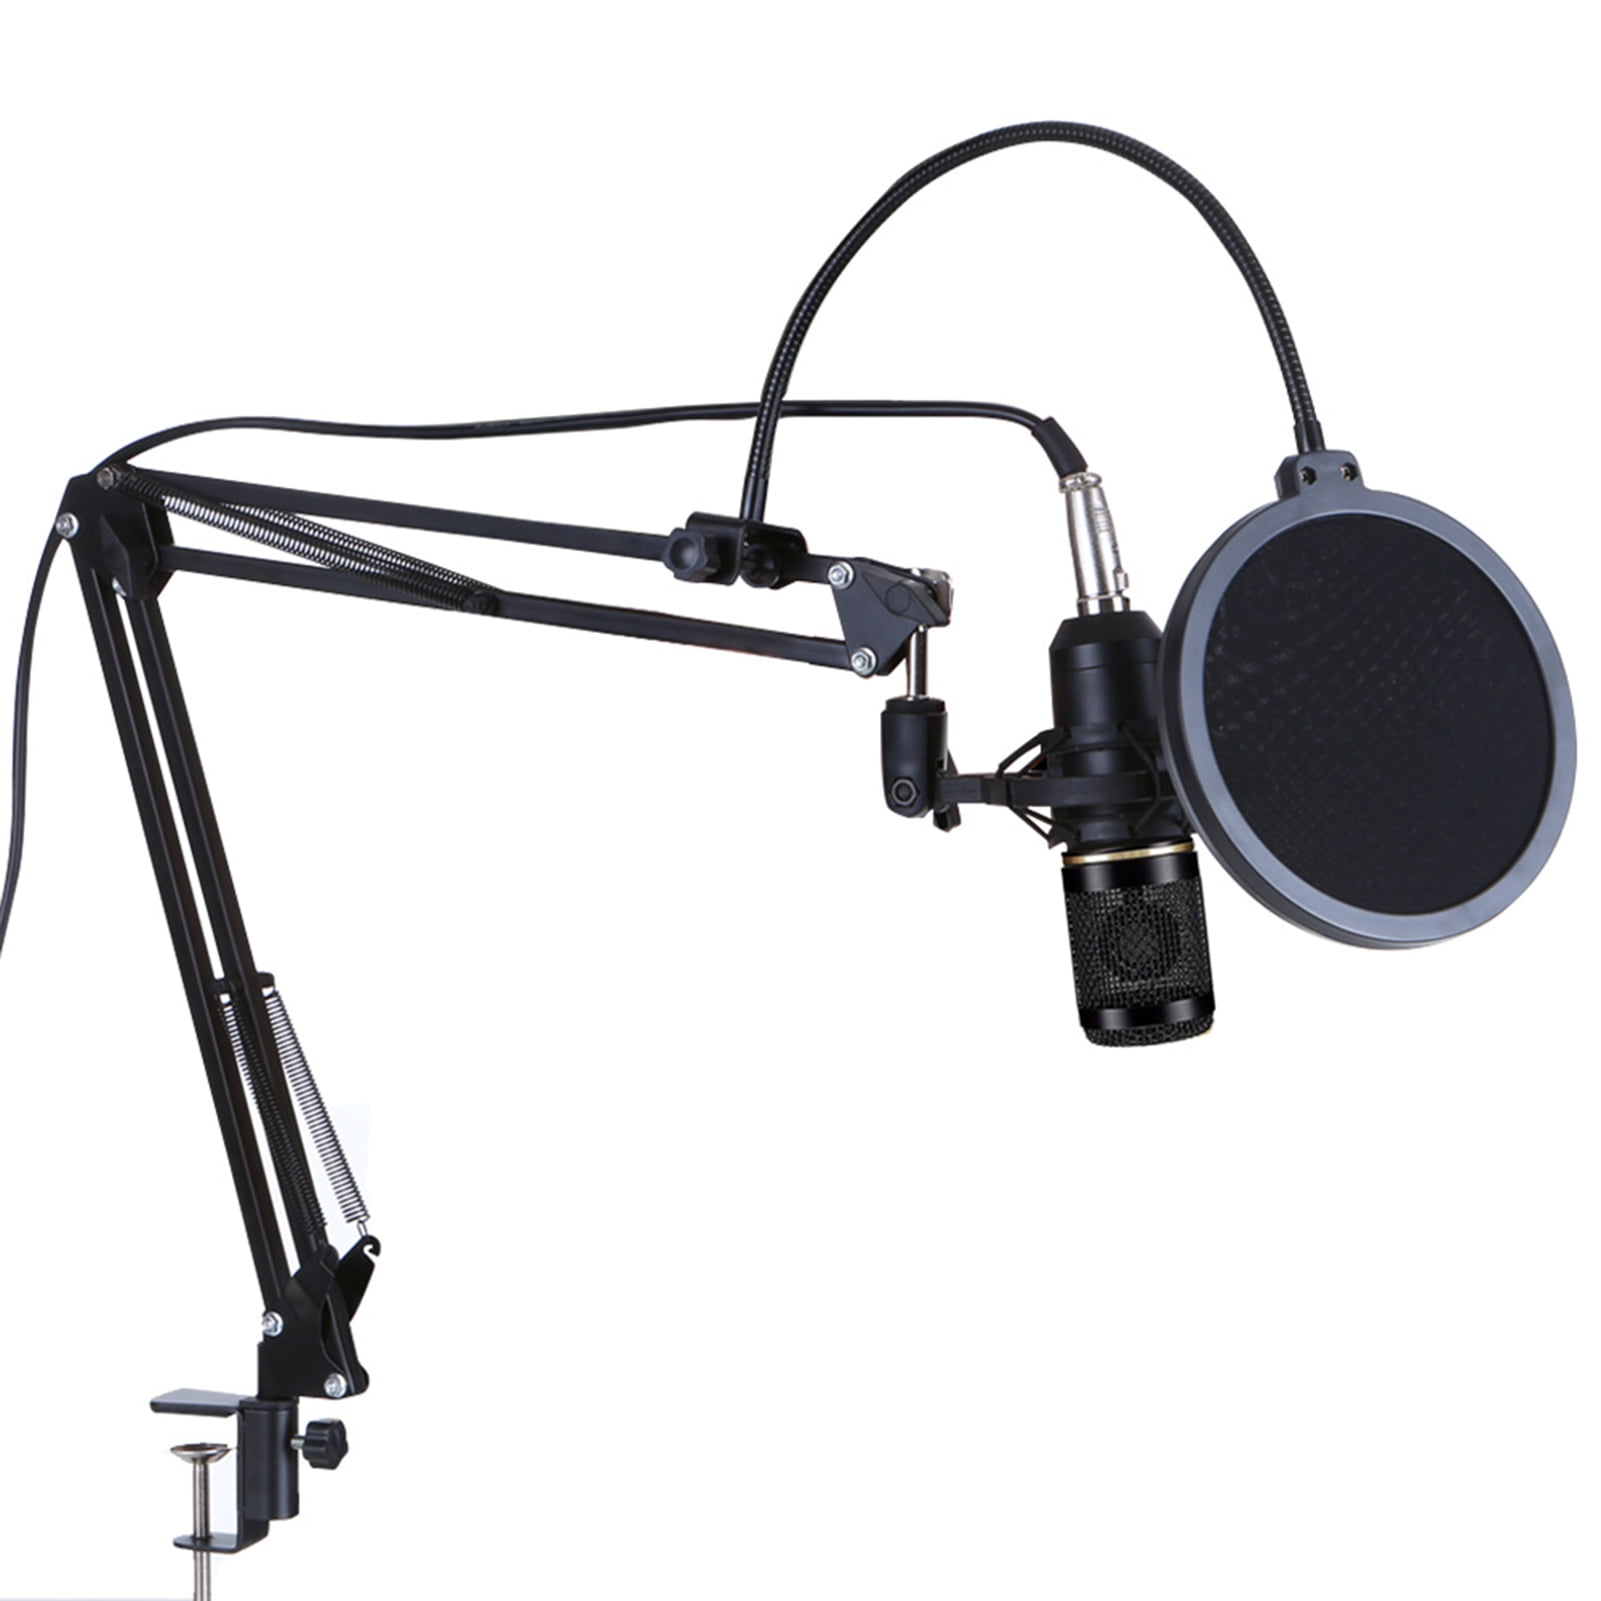 Metal Shock Mount and Double-Layer Pop Filter Compatible with Windows Macos Laptop PC Condenser Microphone Bundle,BM-800 Mic Kit with Live Sound Card Adjustable Suspension Scissor Arm